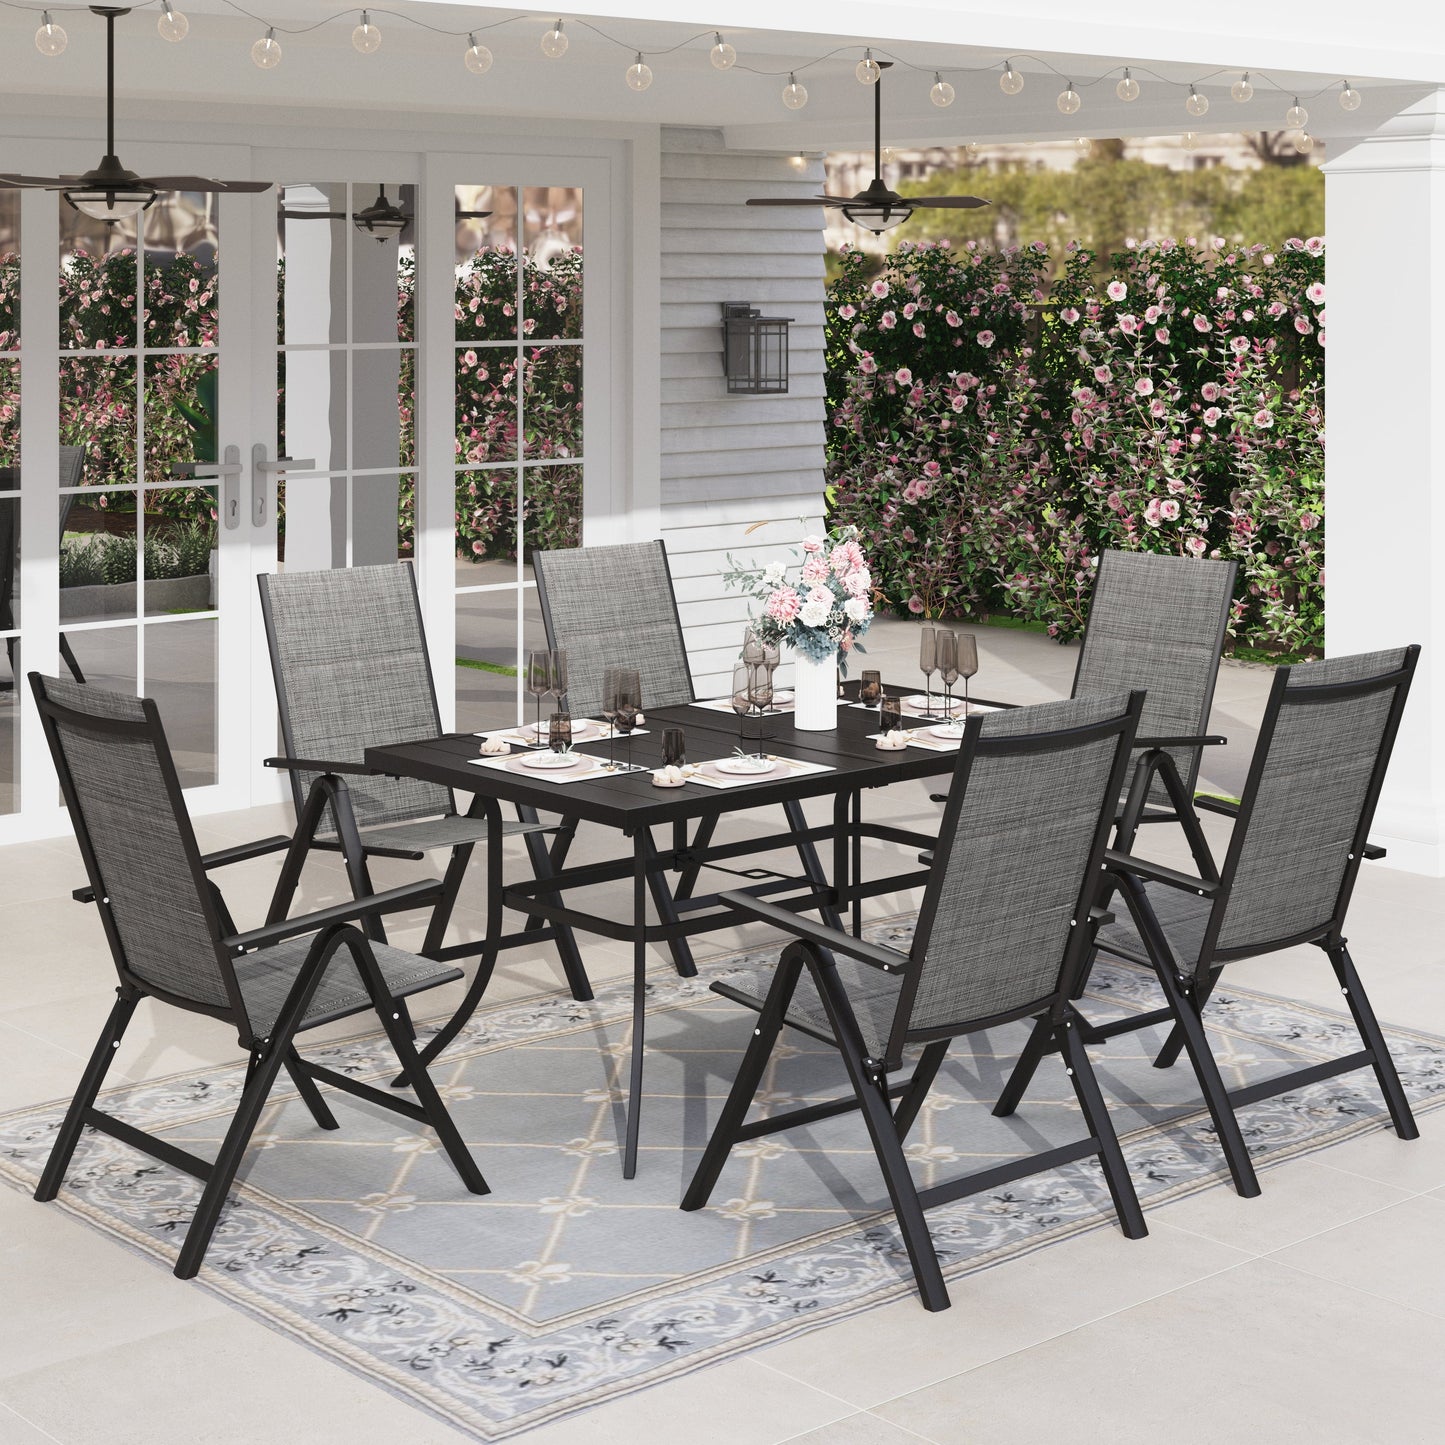 Sophia & William 7 Pieces Patio Dining Set Folding Chairs & Steel Table